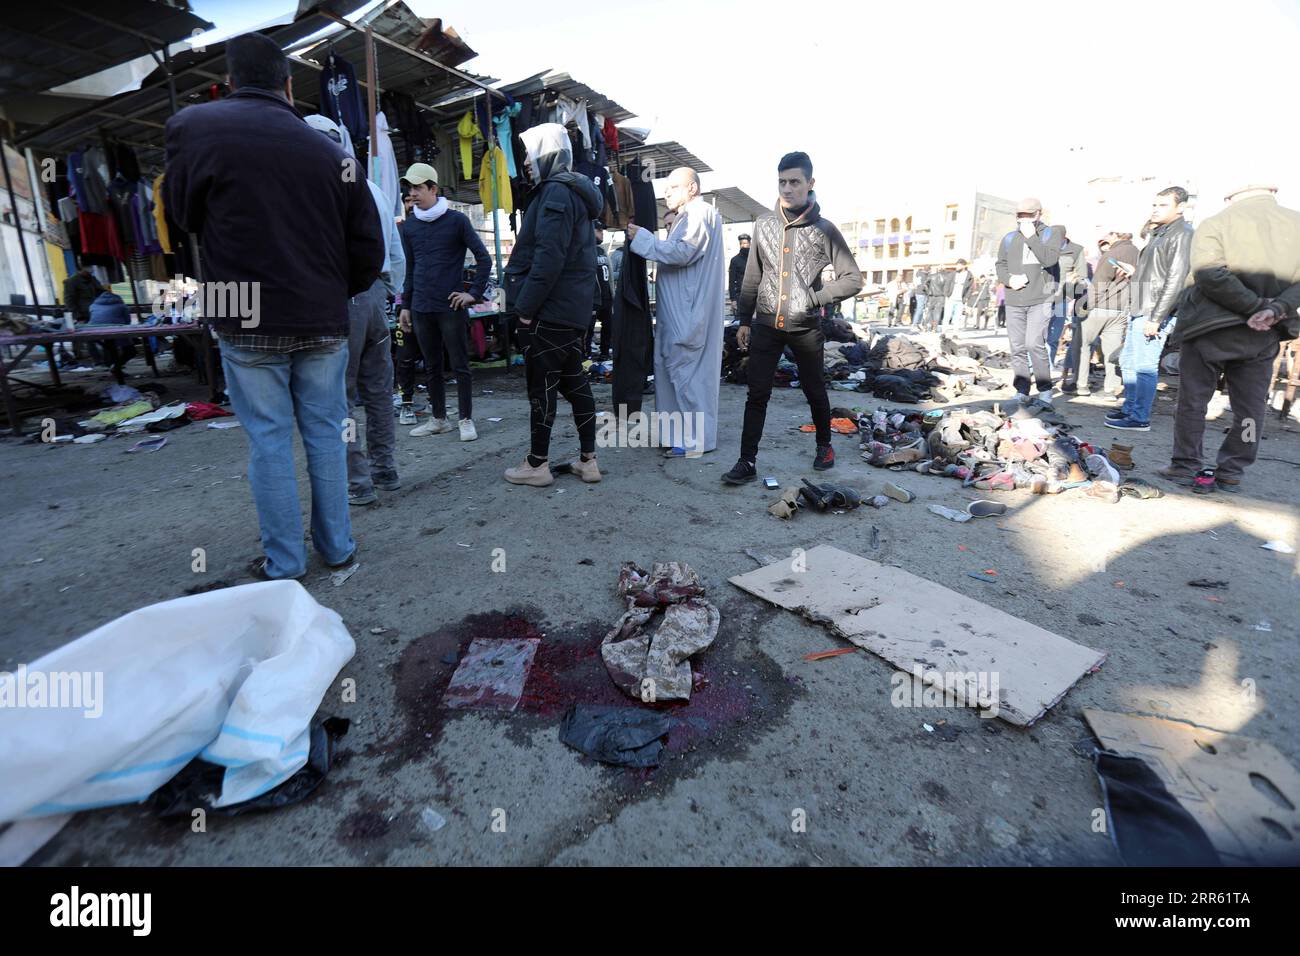 210121 -- BAGHDAD, Jan. 21, 2021  -- Photo taken on Jan. 21, 2021 shows the market damaged by suicide bombings in Iraq s capital Baghdad. At least 32 people were killed and 110 others wounded on Thursday in the twin suicide bombings in Iraq s capital Baghdad, Iraqi Health Minister Hassan al-Tamimi said. Baghdad s hospitals received 32 bodies, while 110 wounded people were admitted for treatment, al-Tamimi said in a statement. Earlier in the morning, a suicide bomber blew up his explosive belt in a crowded outdoor clothing market in Bab al-Sharji area, before a second one detonated his a few mi Stock Photo